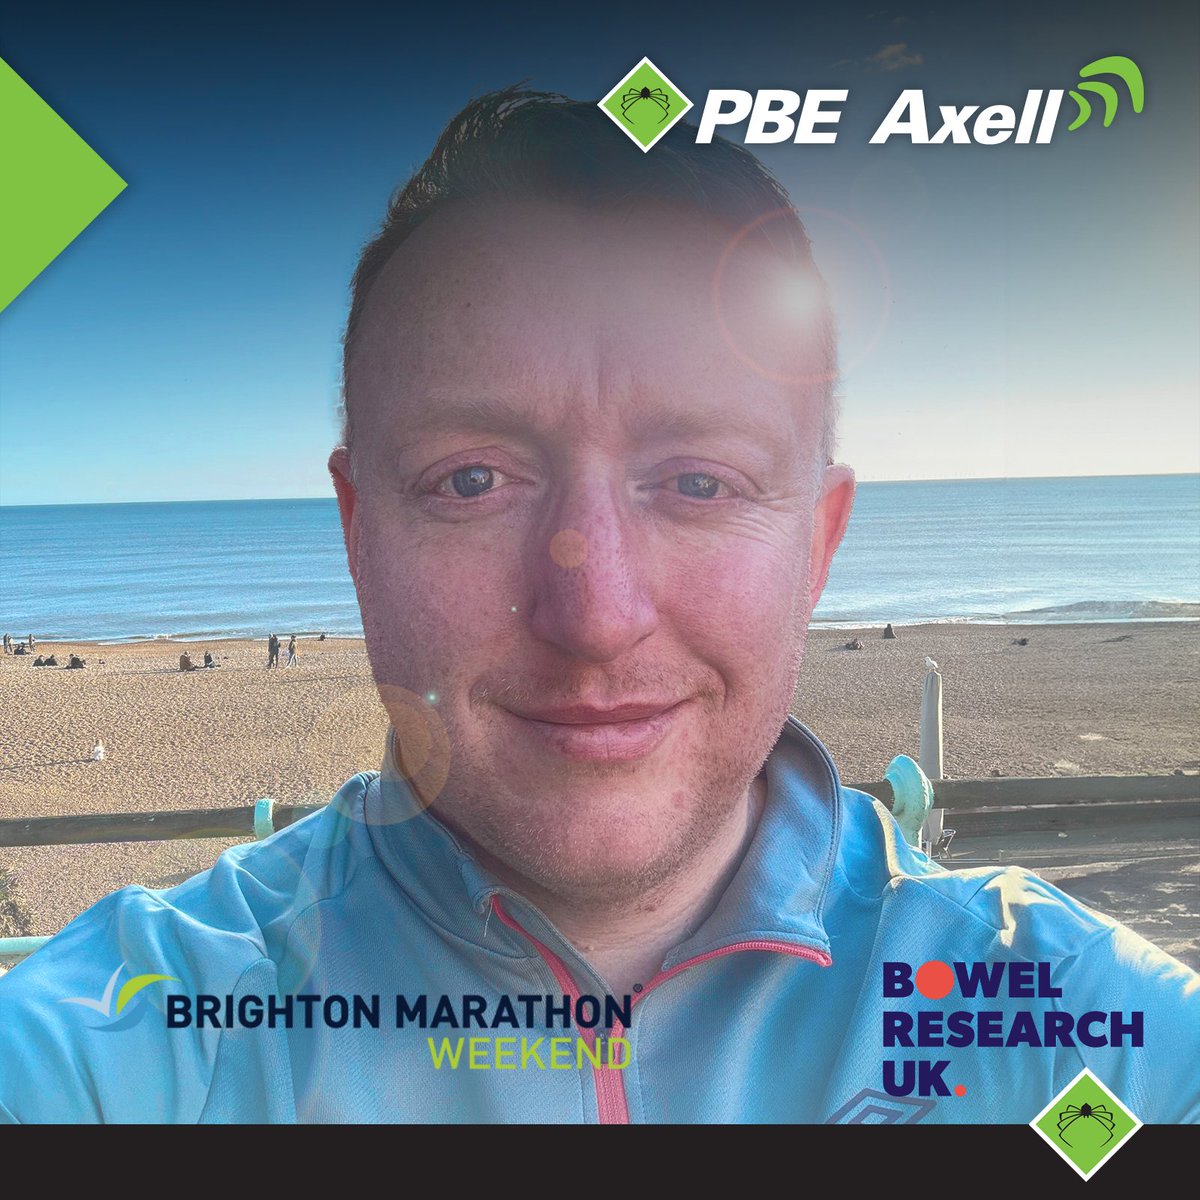 On 7th April our very own Ben Gainsley will be running the #BrightonMarathon, raising money for @BowelResearch 

On behalf of everyone throughout the PBE Group, good luck Ben!

Donate to Ben's campaign: bit.ly/3vvwyui

#BowelResearch #BowelCancer #CancerResearch